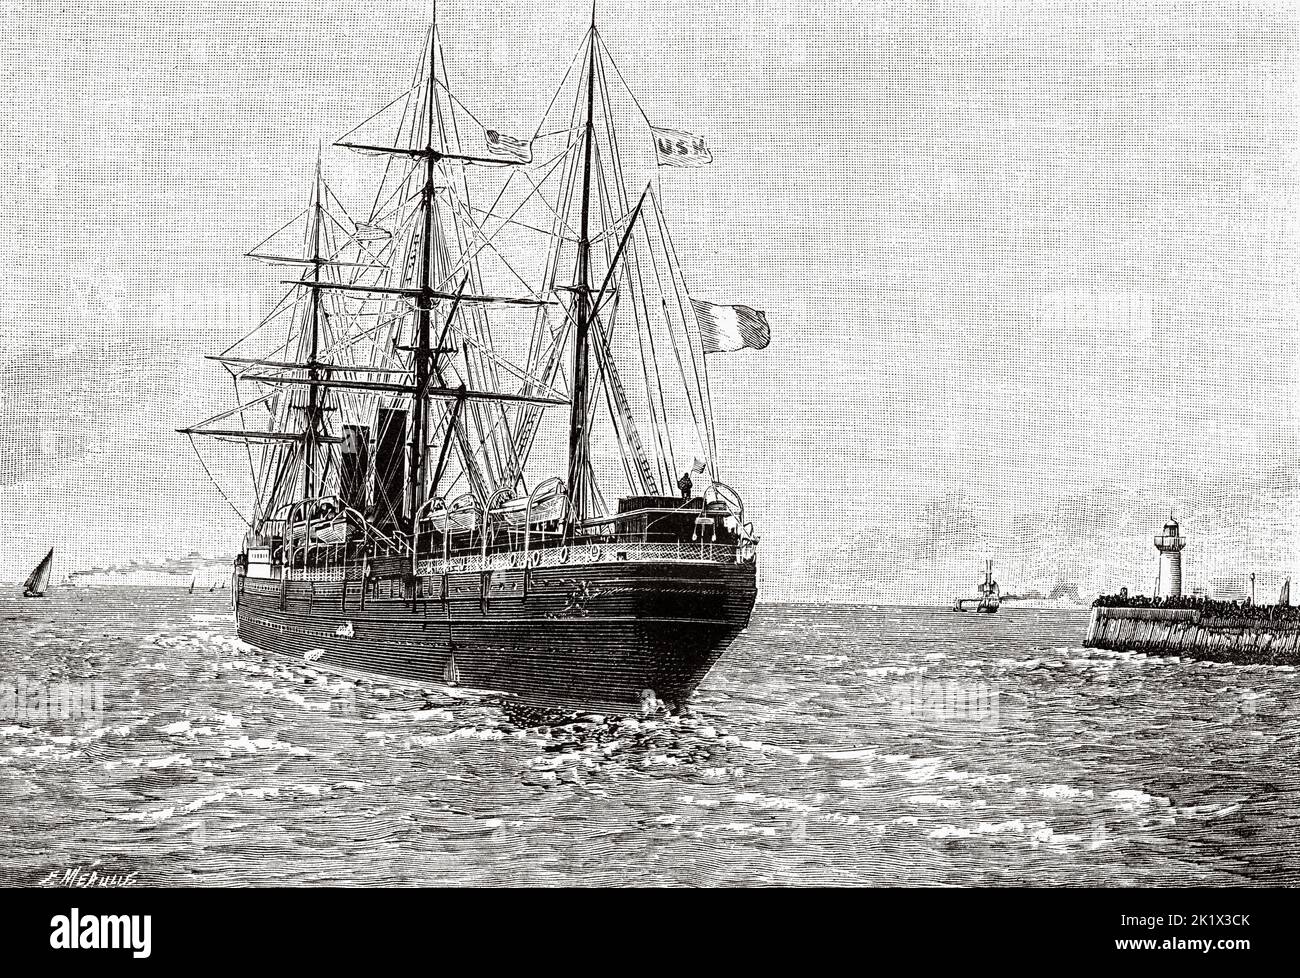 A transatlantic ship leaving the port of Le Havre, France. Old 19th century engraved illustration from La Nature 1890 Stock Photo